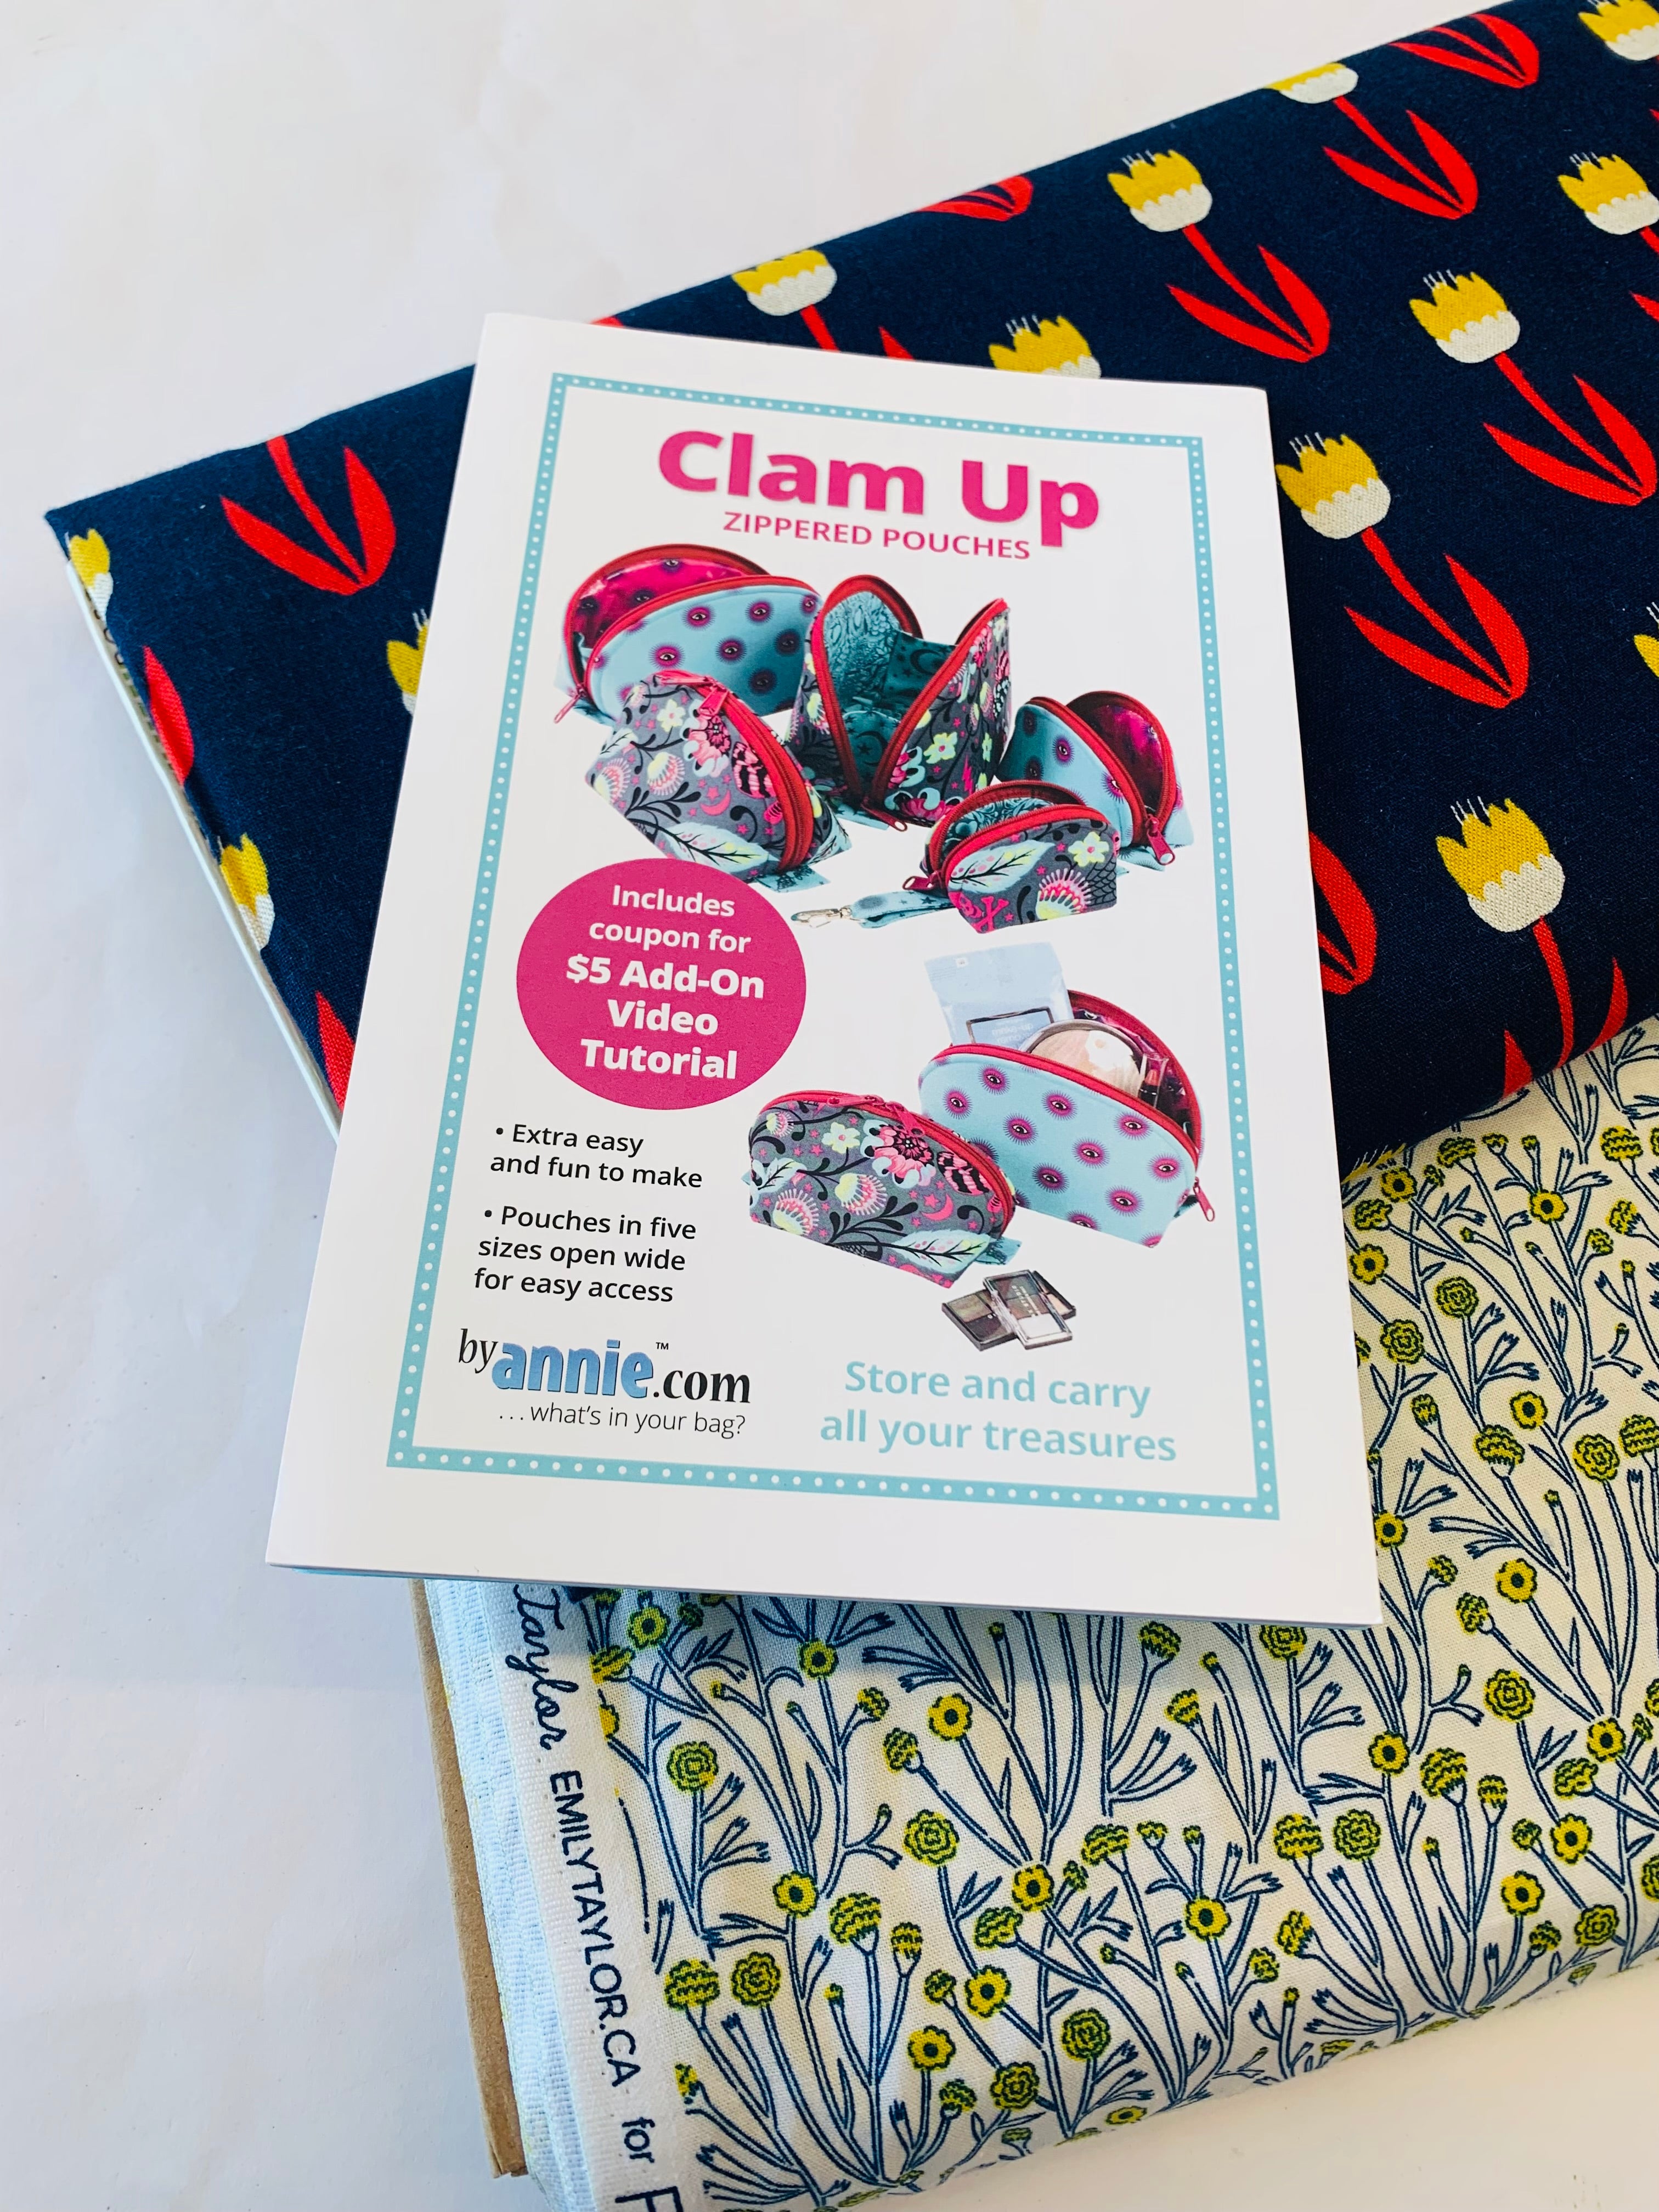 Clam Up Zippered Pouches kit